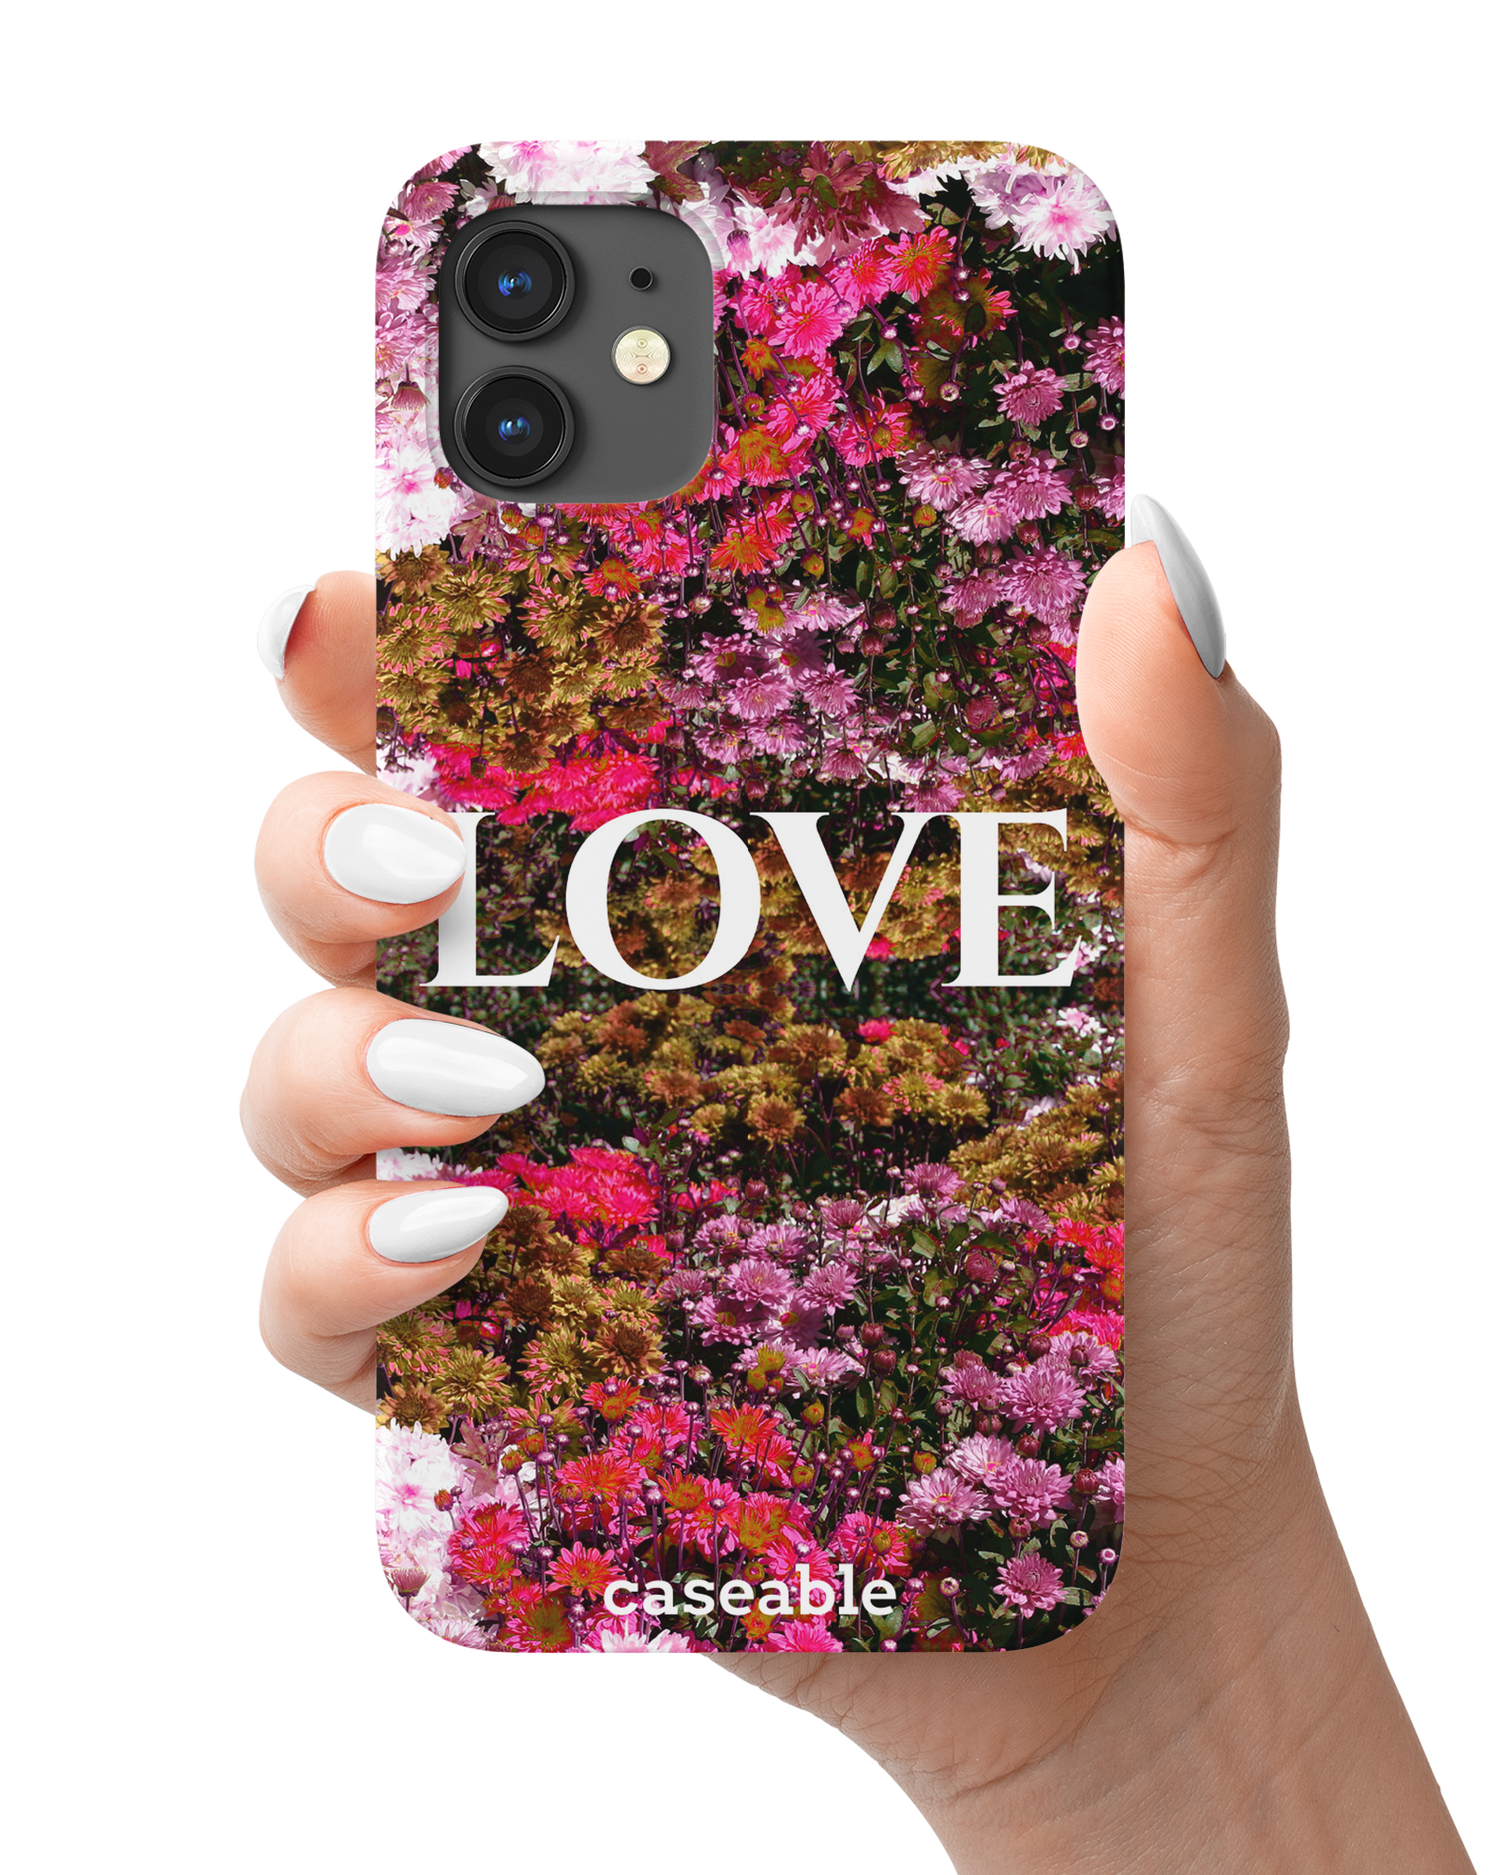 Luxe Love Hard Shell Phone Case Apple iPhone 12 mini held in hand